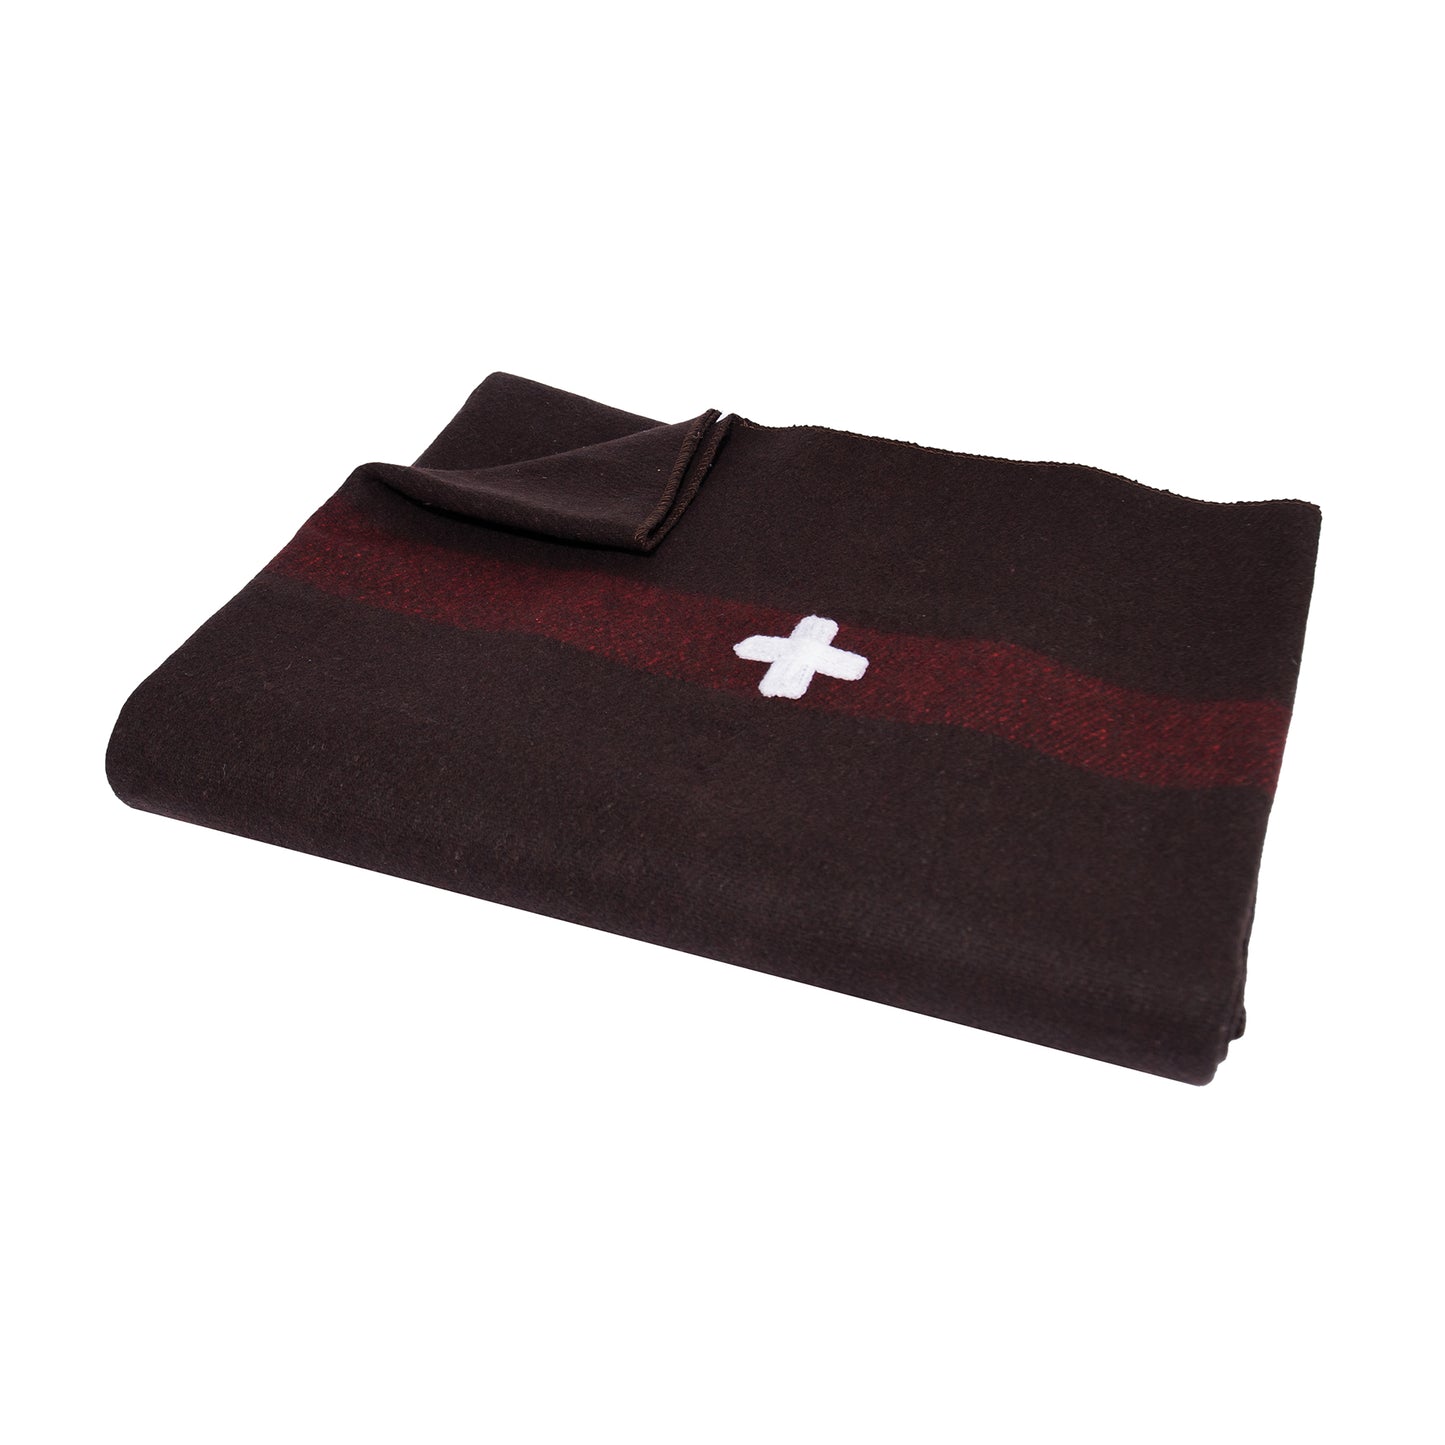 Rothco Swiss Army Wool Blanket With Cross